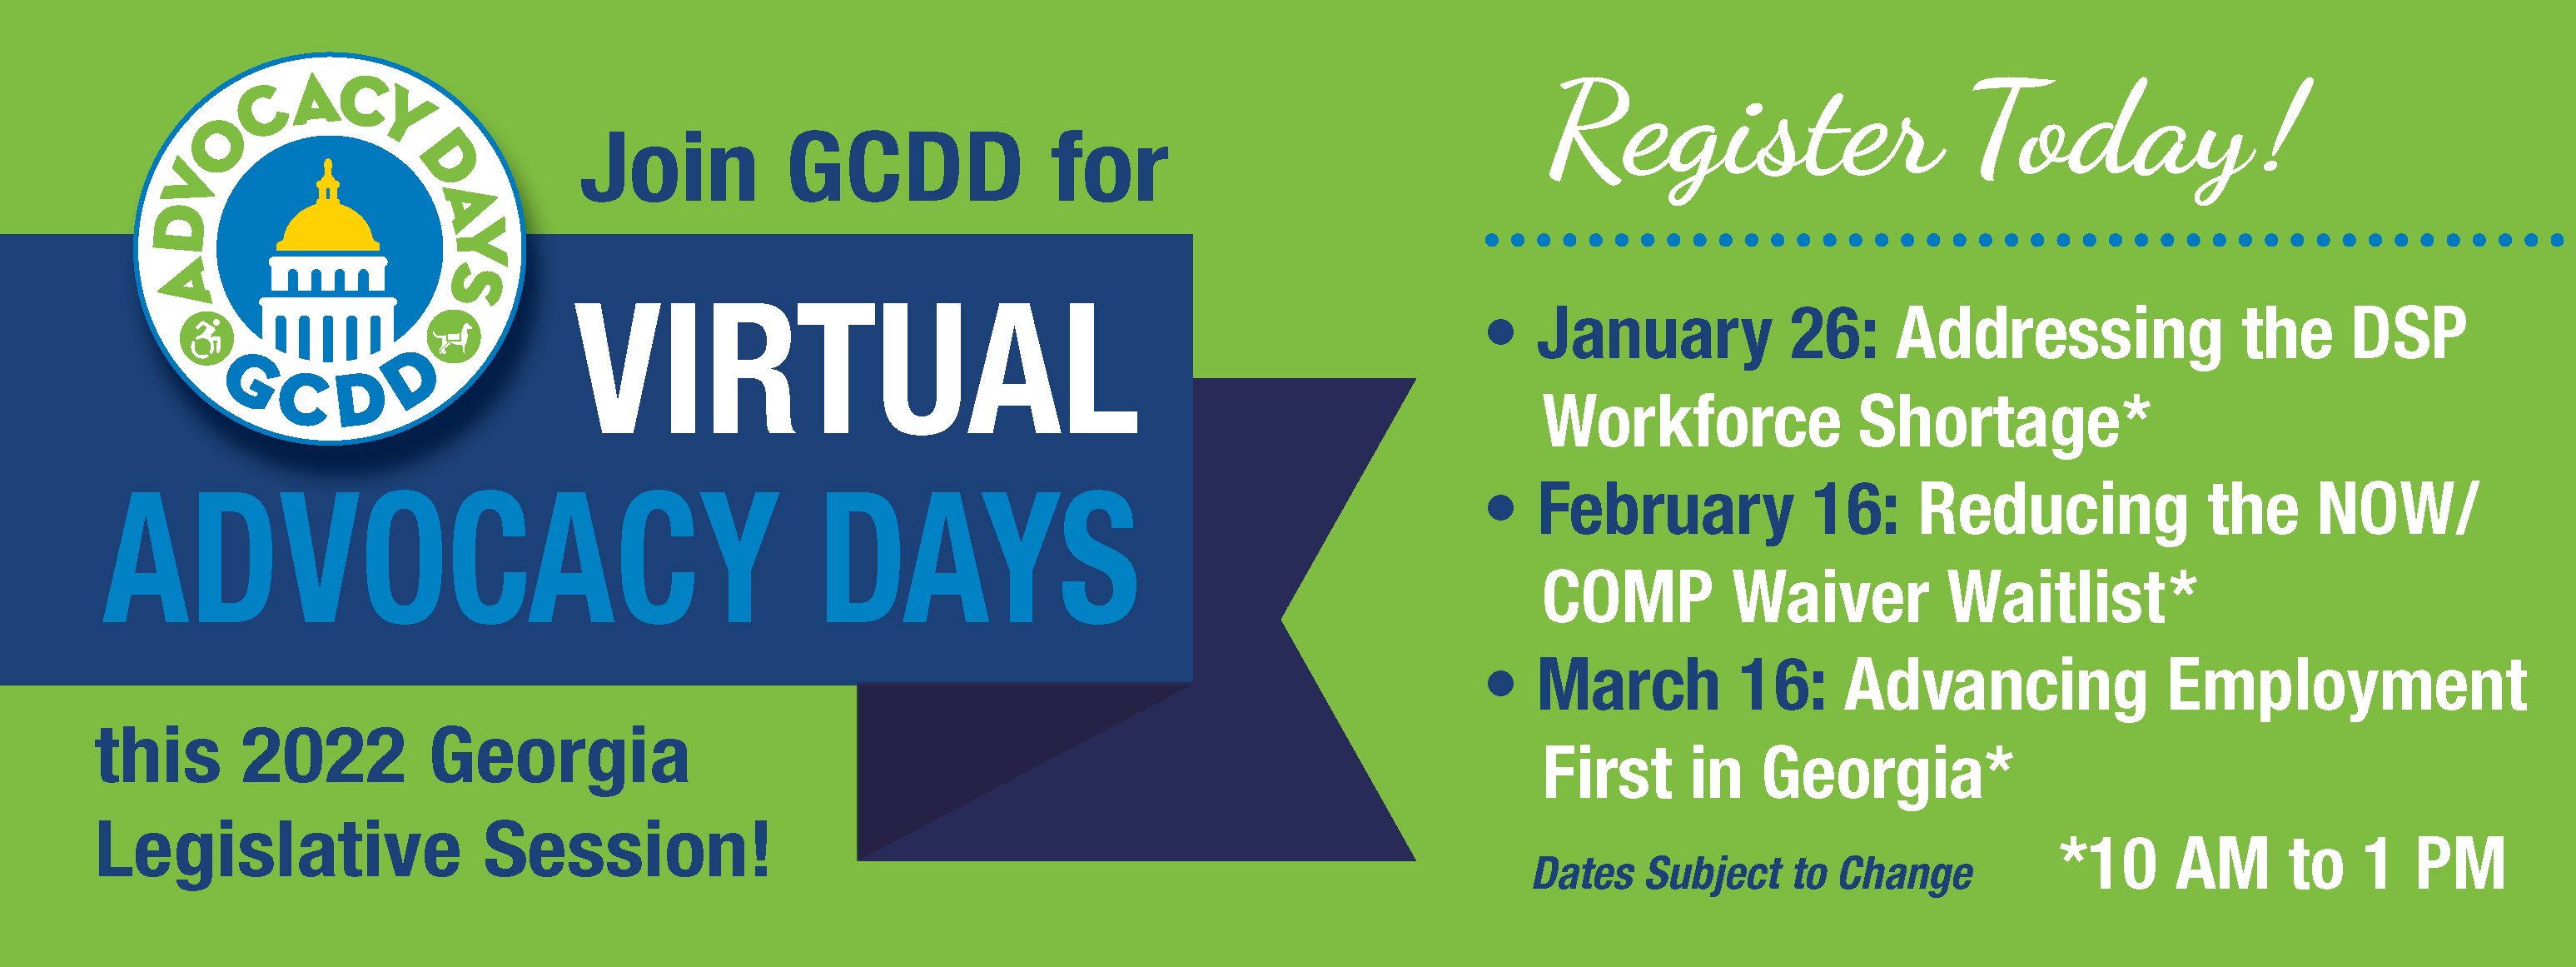 Register Today for GCDD's 2022 Virtual Advocacy Days